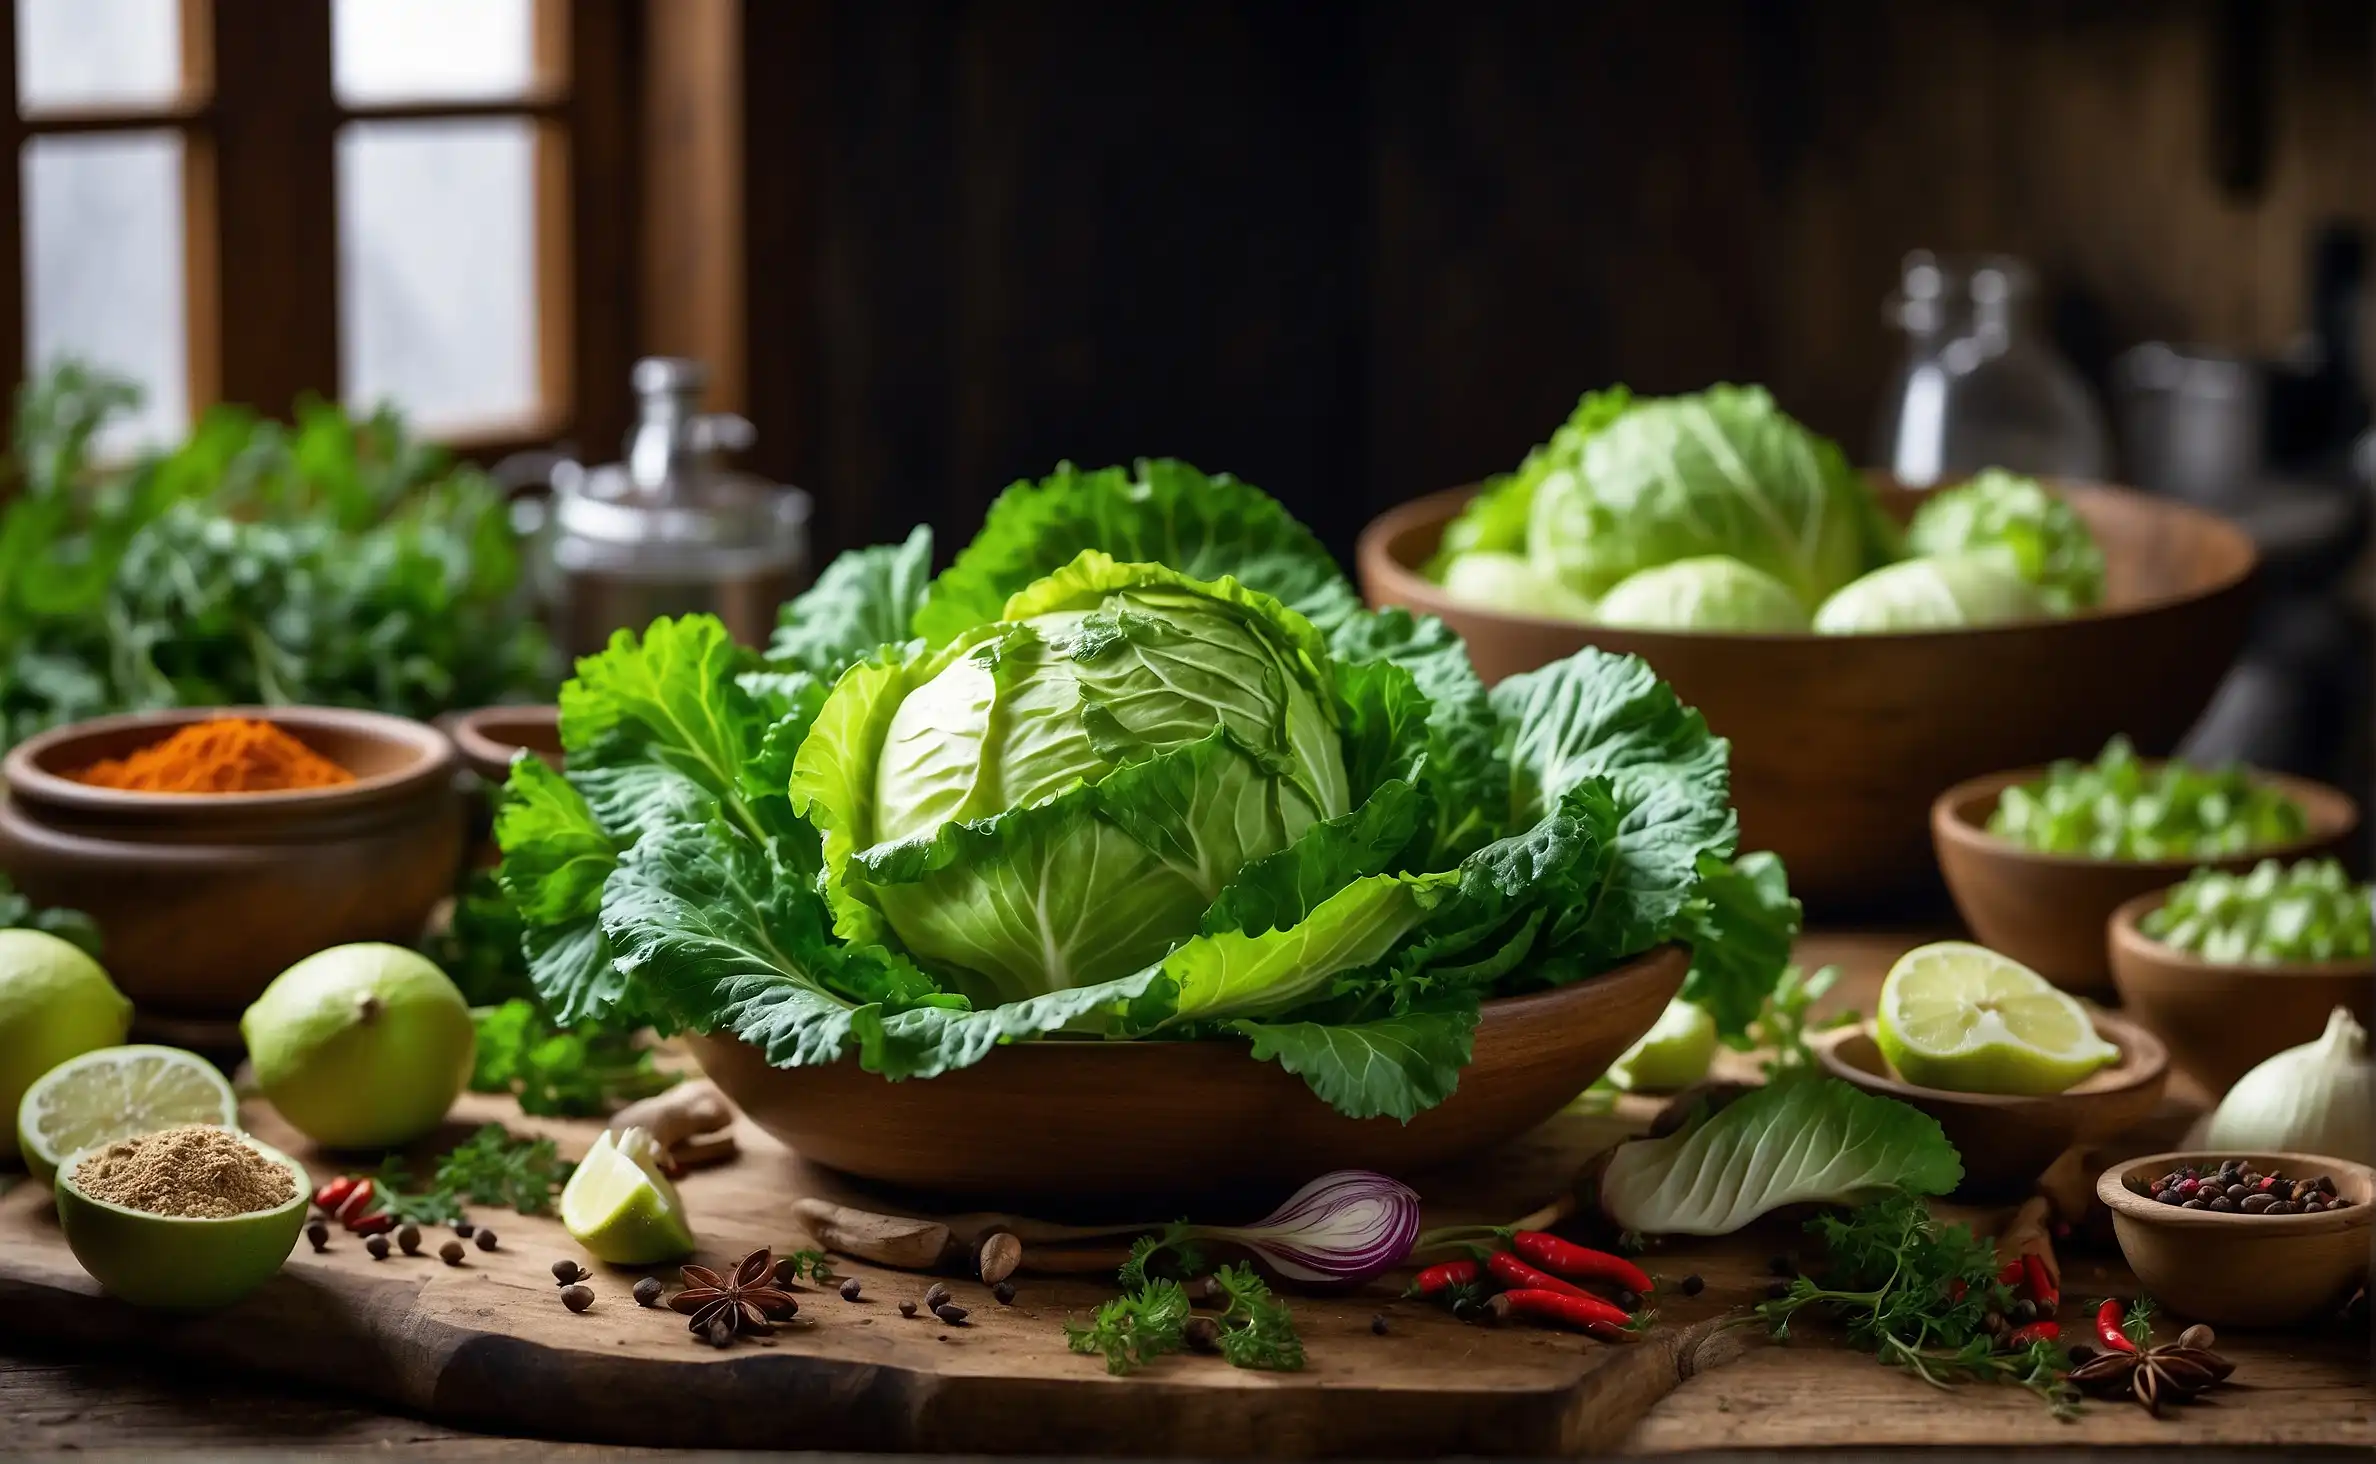 Where to Buy Sour Cabbage Leaves